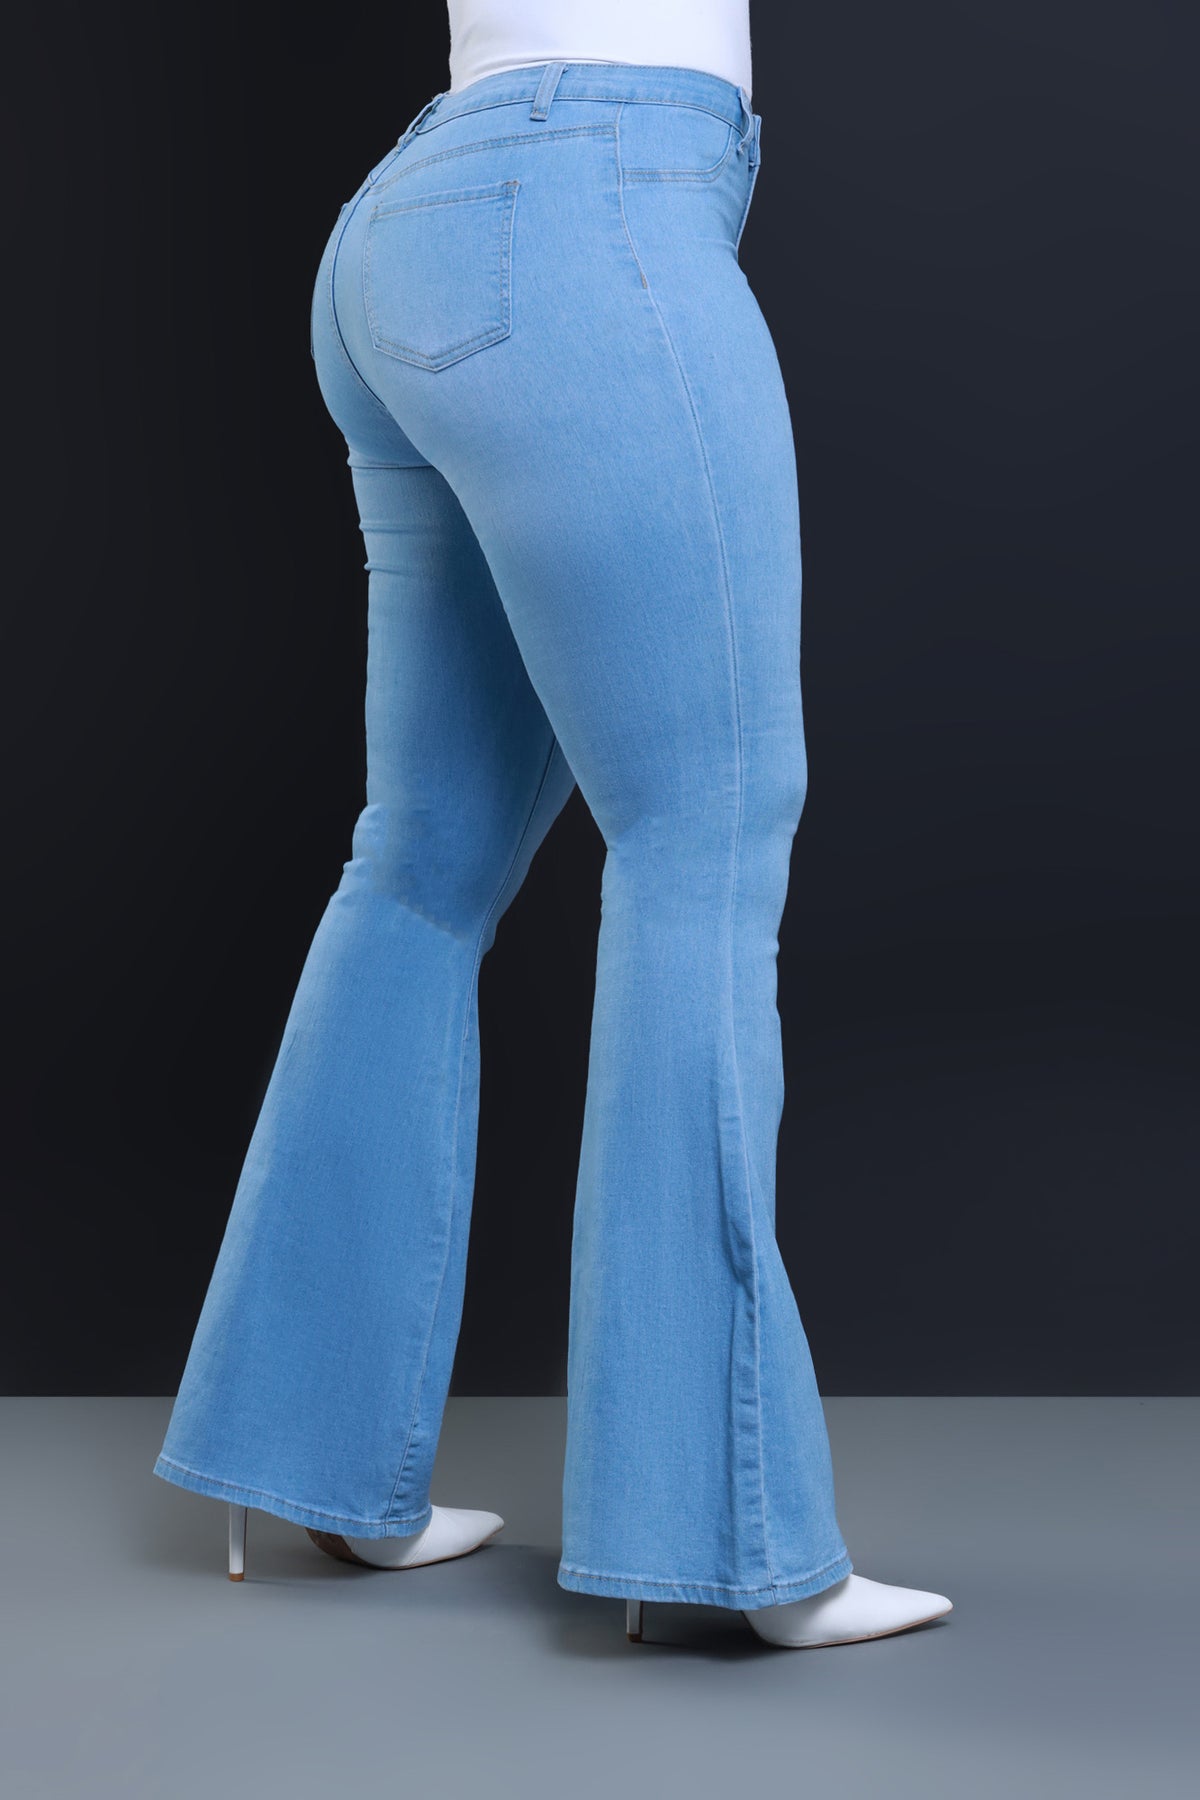 HIGH WAISTED STRETCHY BELL BOTTOM LIGHT BLUE - LOVER BRAND FASHION